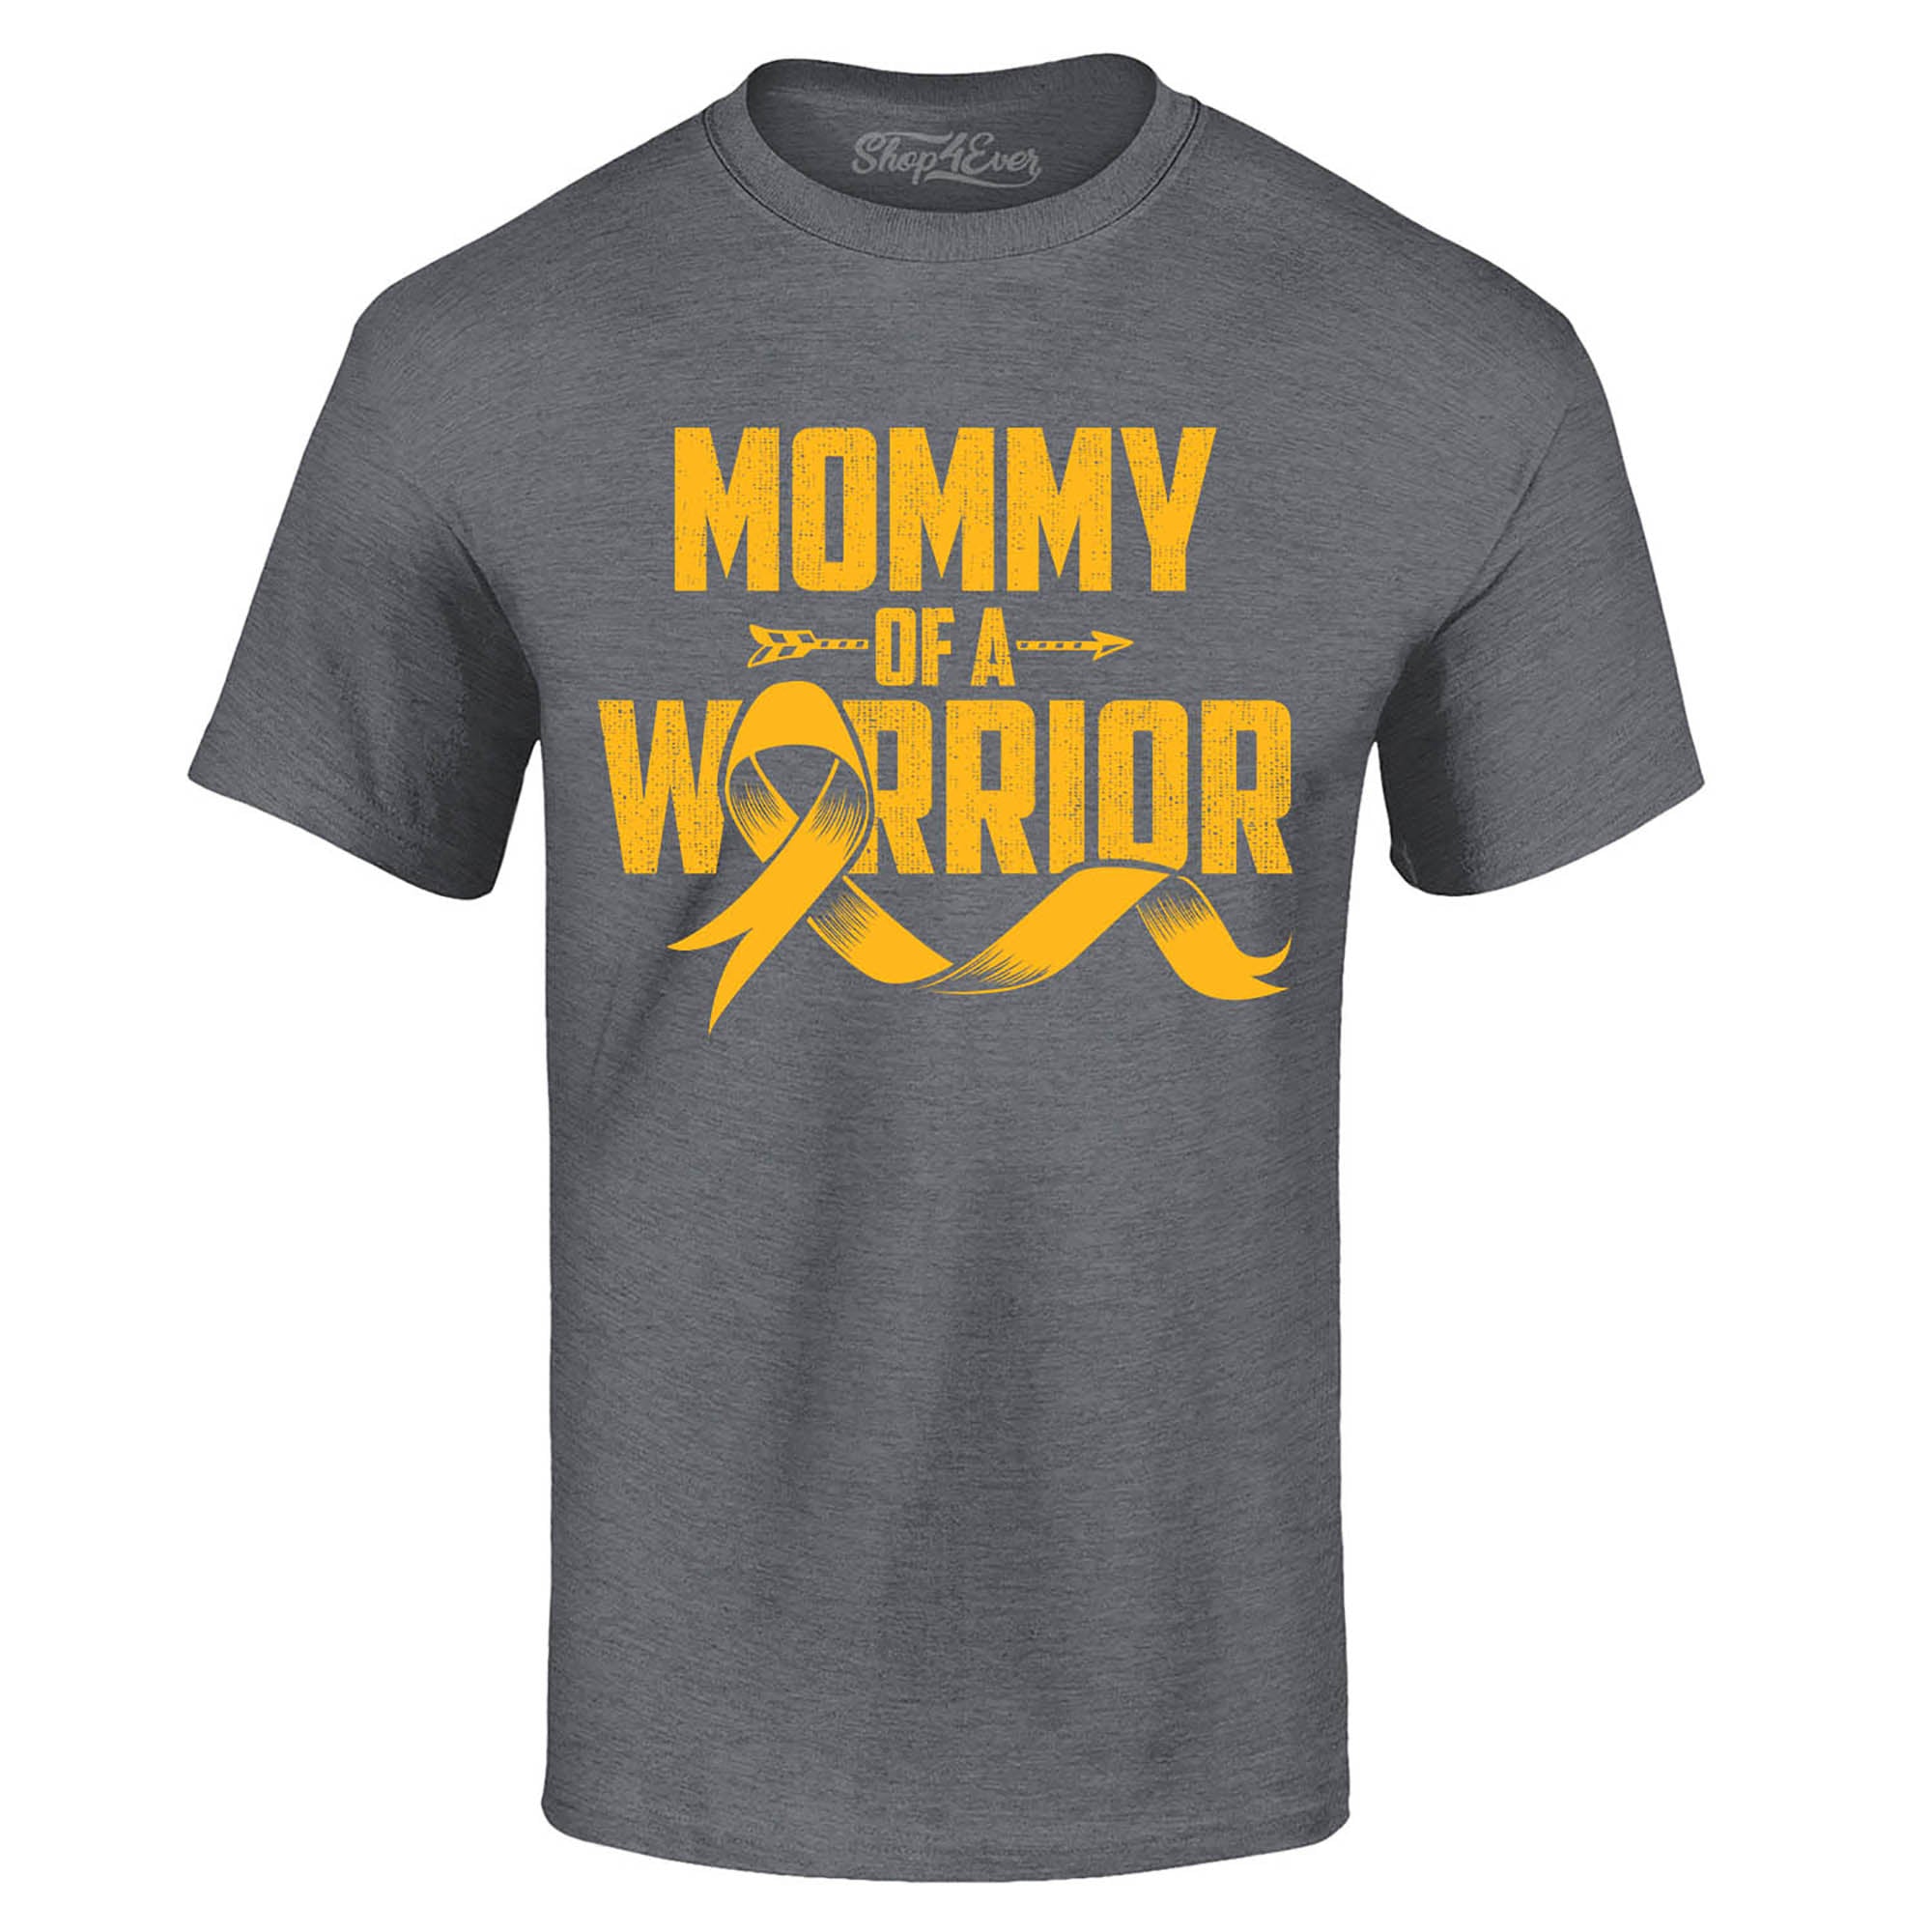 Mommy of a Warrior Childhood Cancer Awareness T-Shirt